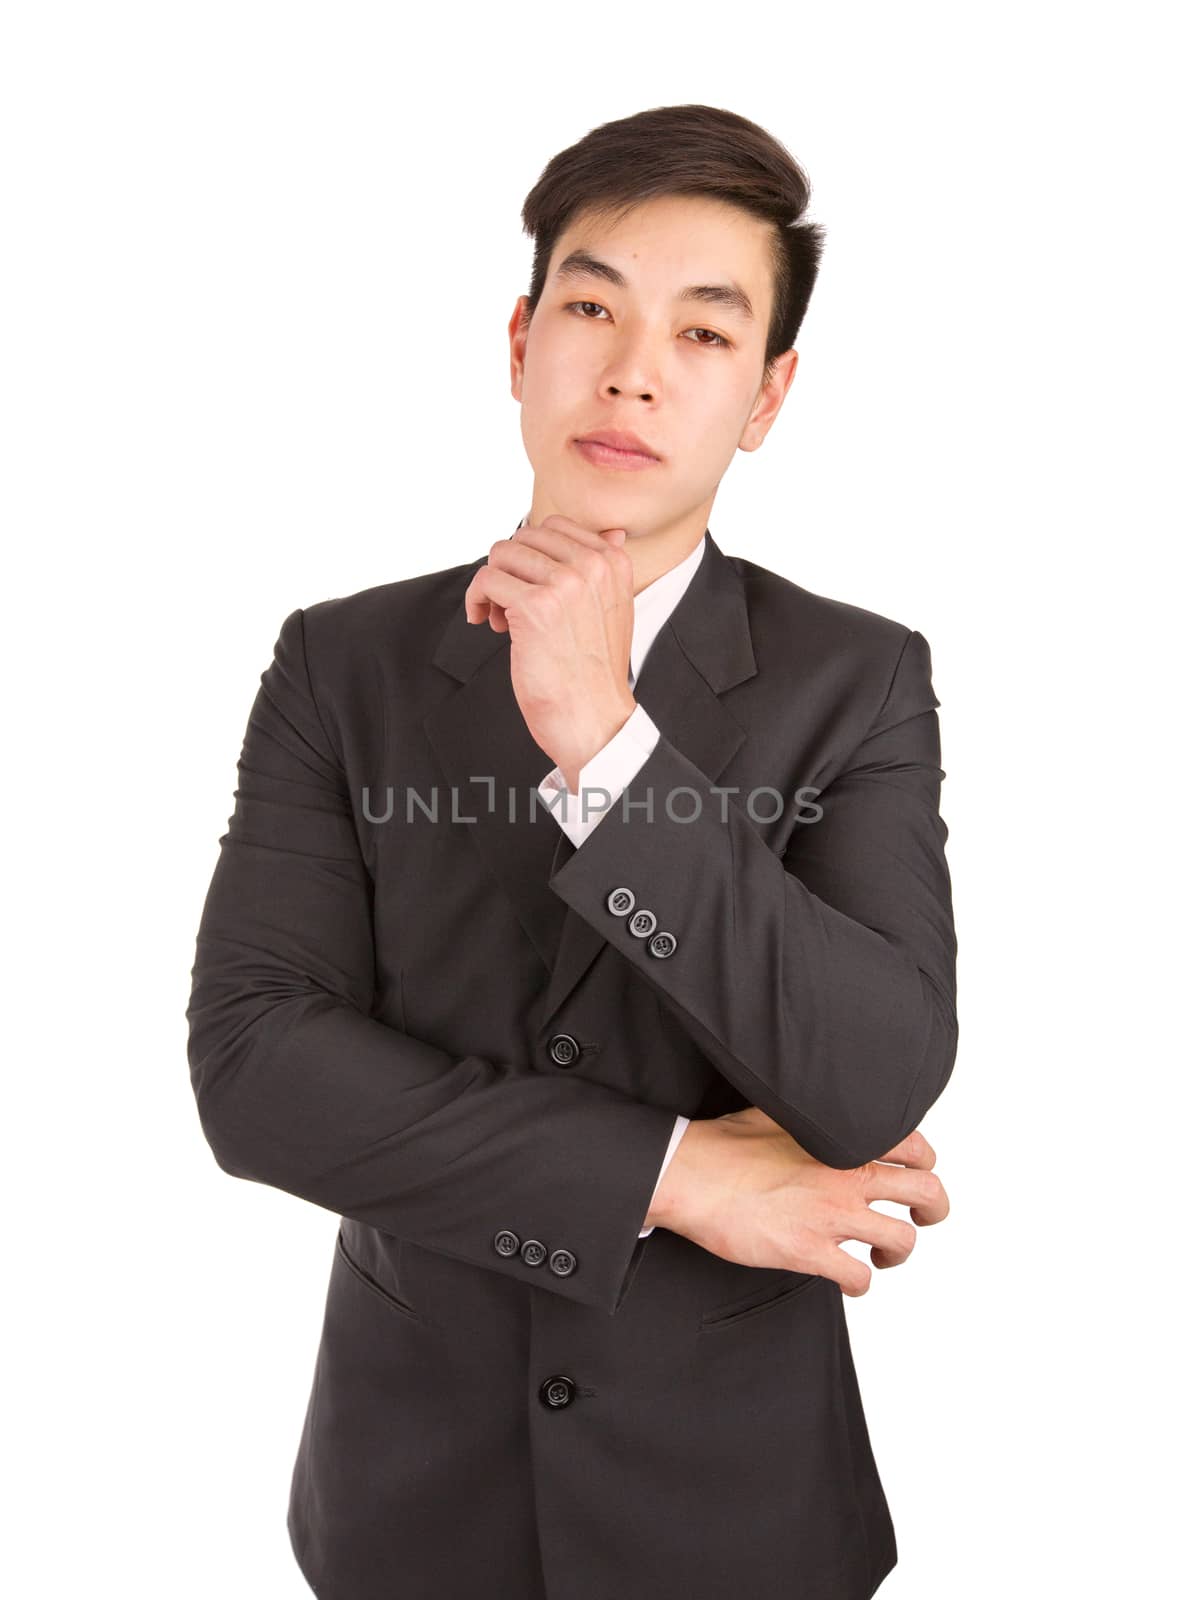 Young Businessman smart portrait looking at camera isolated on white background : Asia